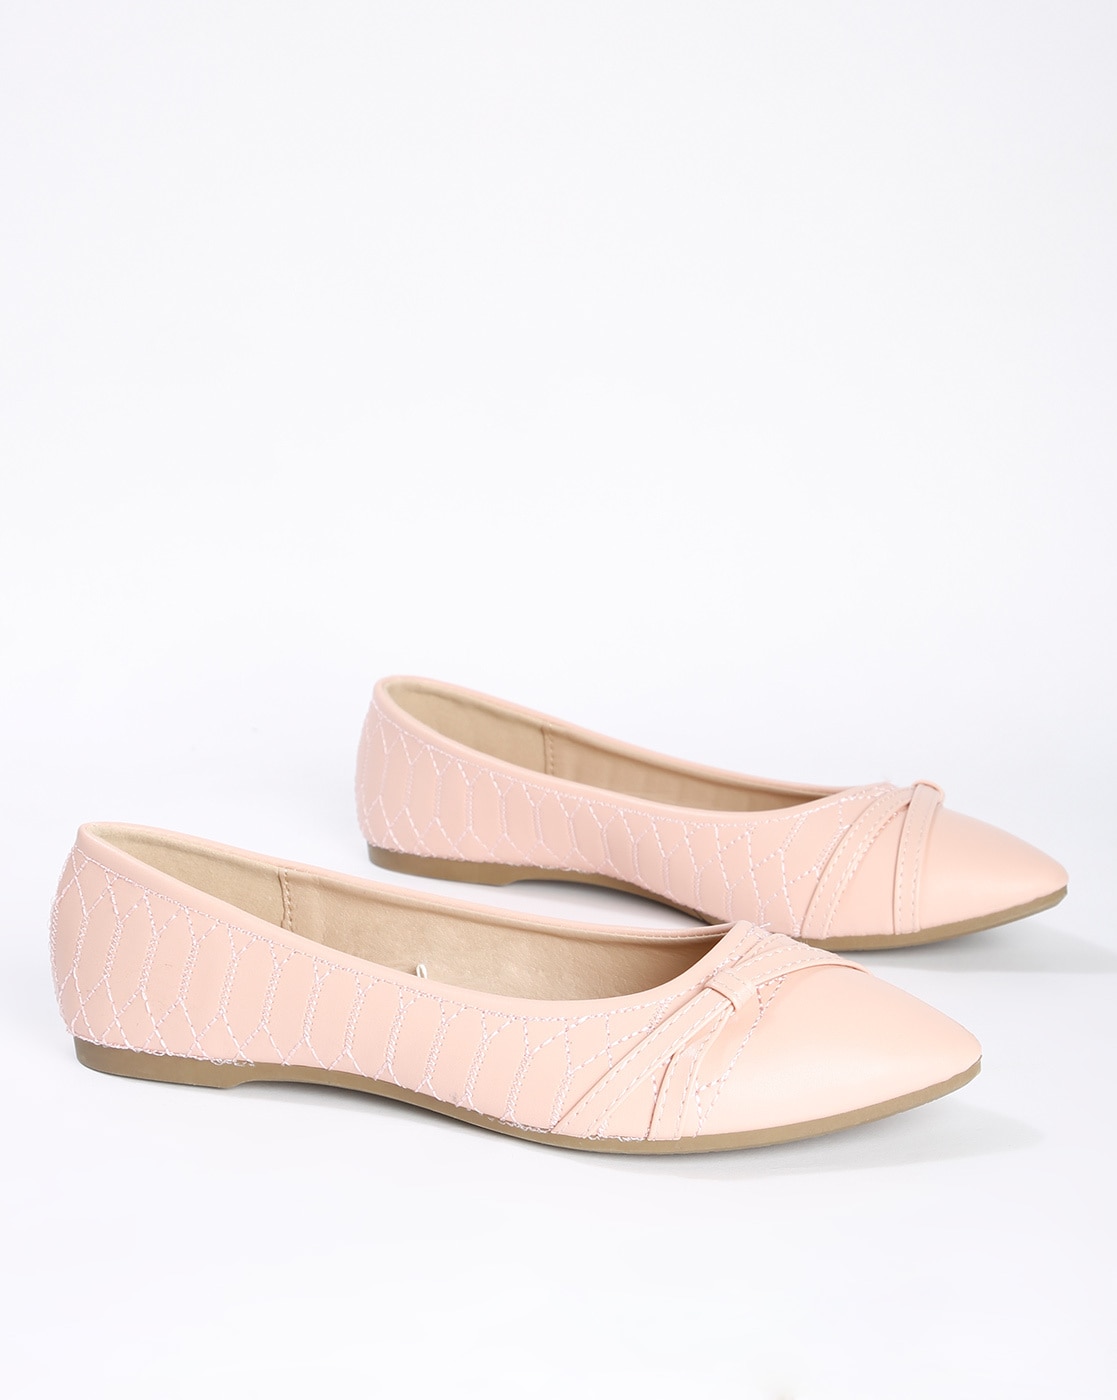 pink flat shoes